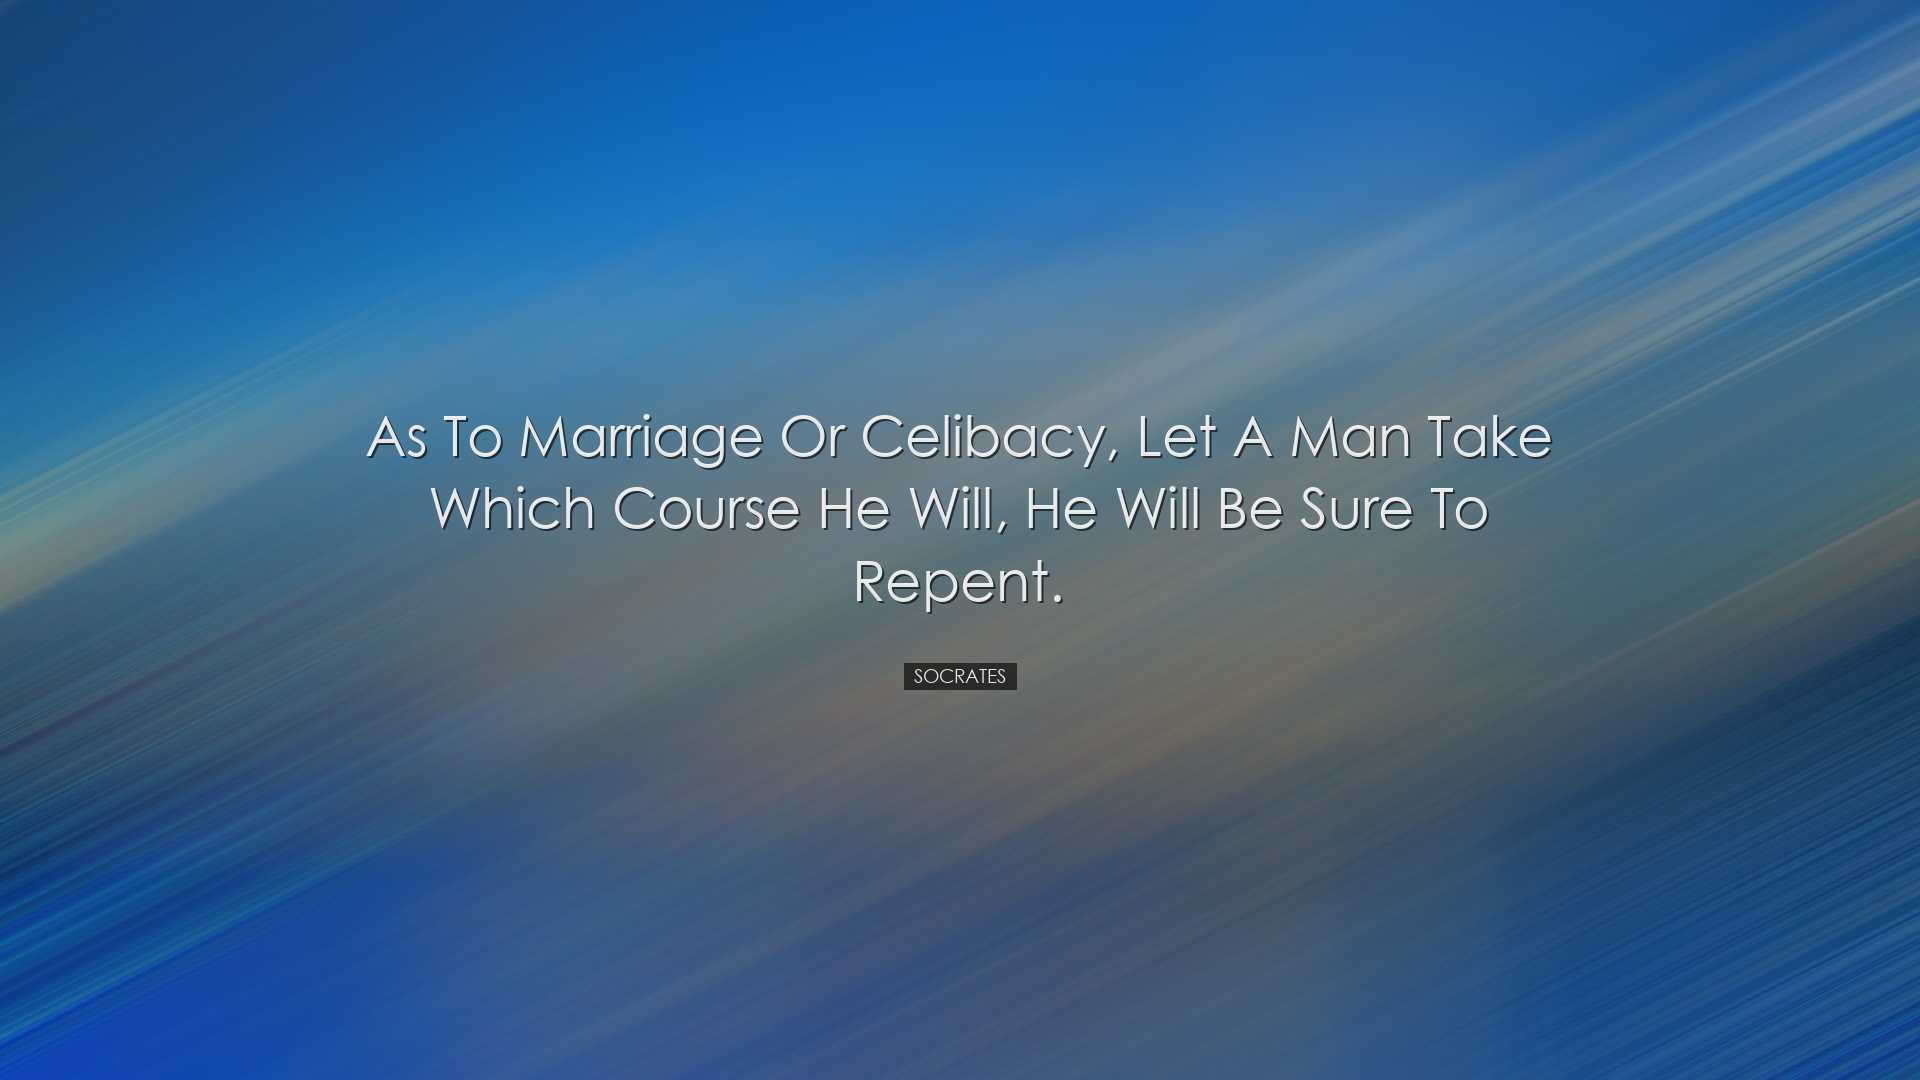 As to marriage or celibacy, let a man take which course he will, h